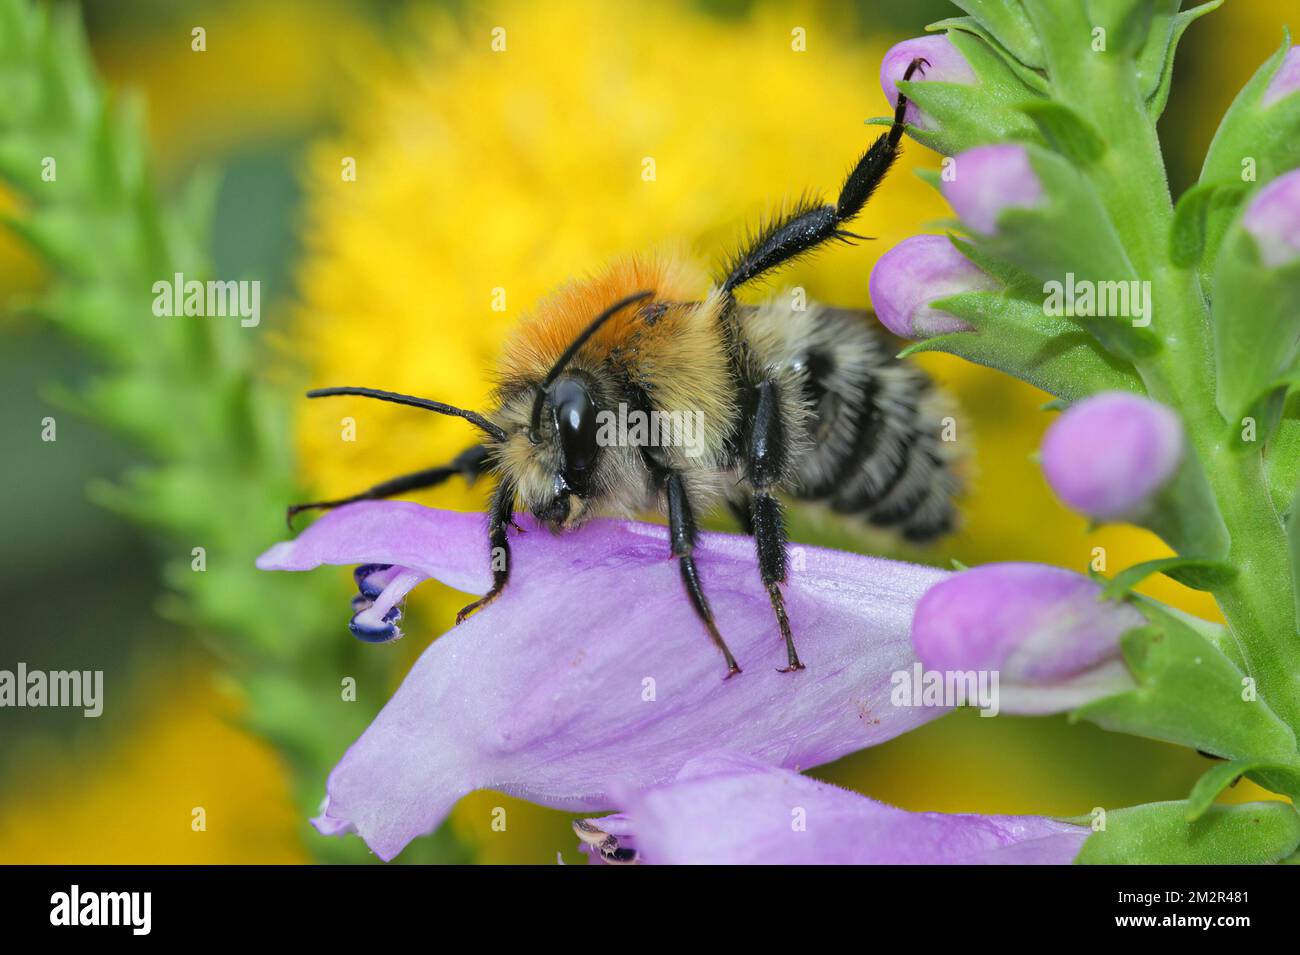 Colorful Closeup on a worked brown banded carder bee, Bombus pascuorum, sitting amongst purple and yellow flowers in the garden Stock Photo